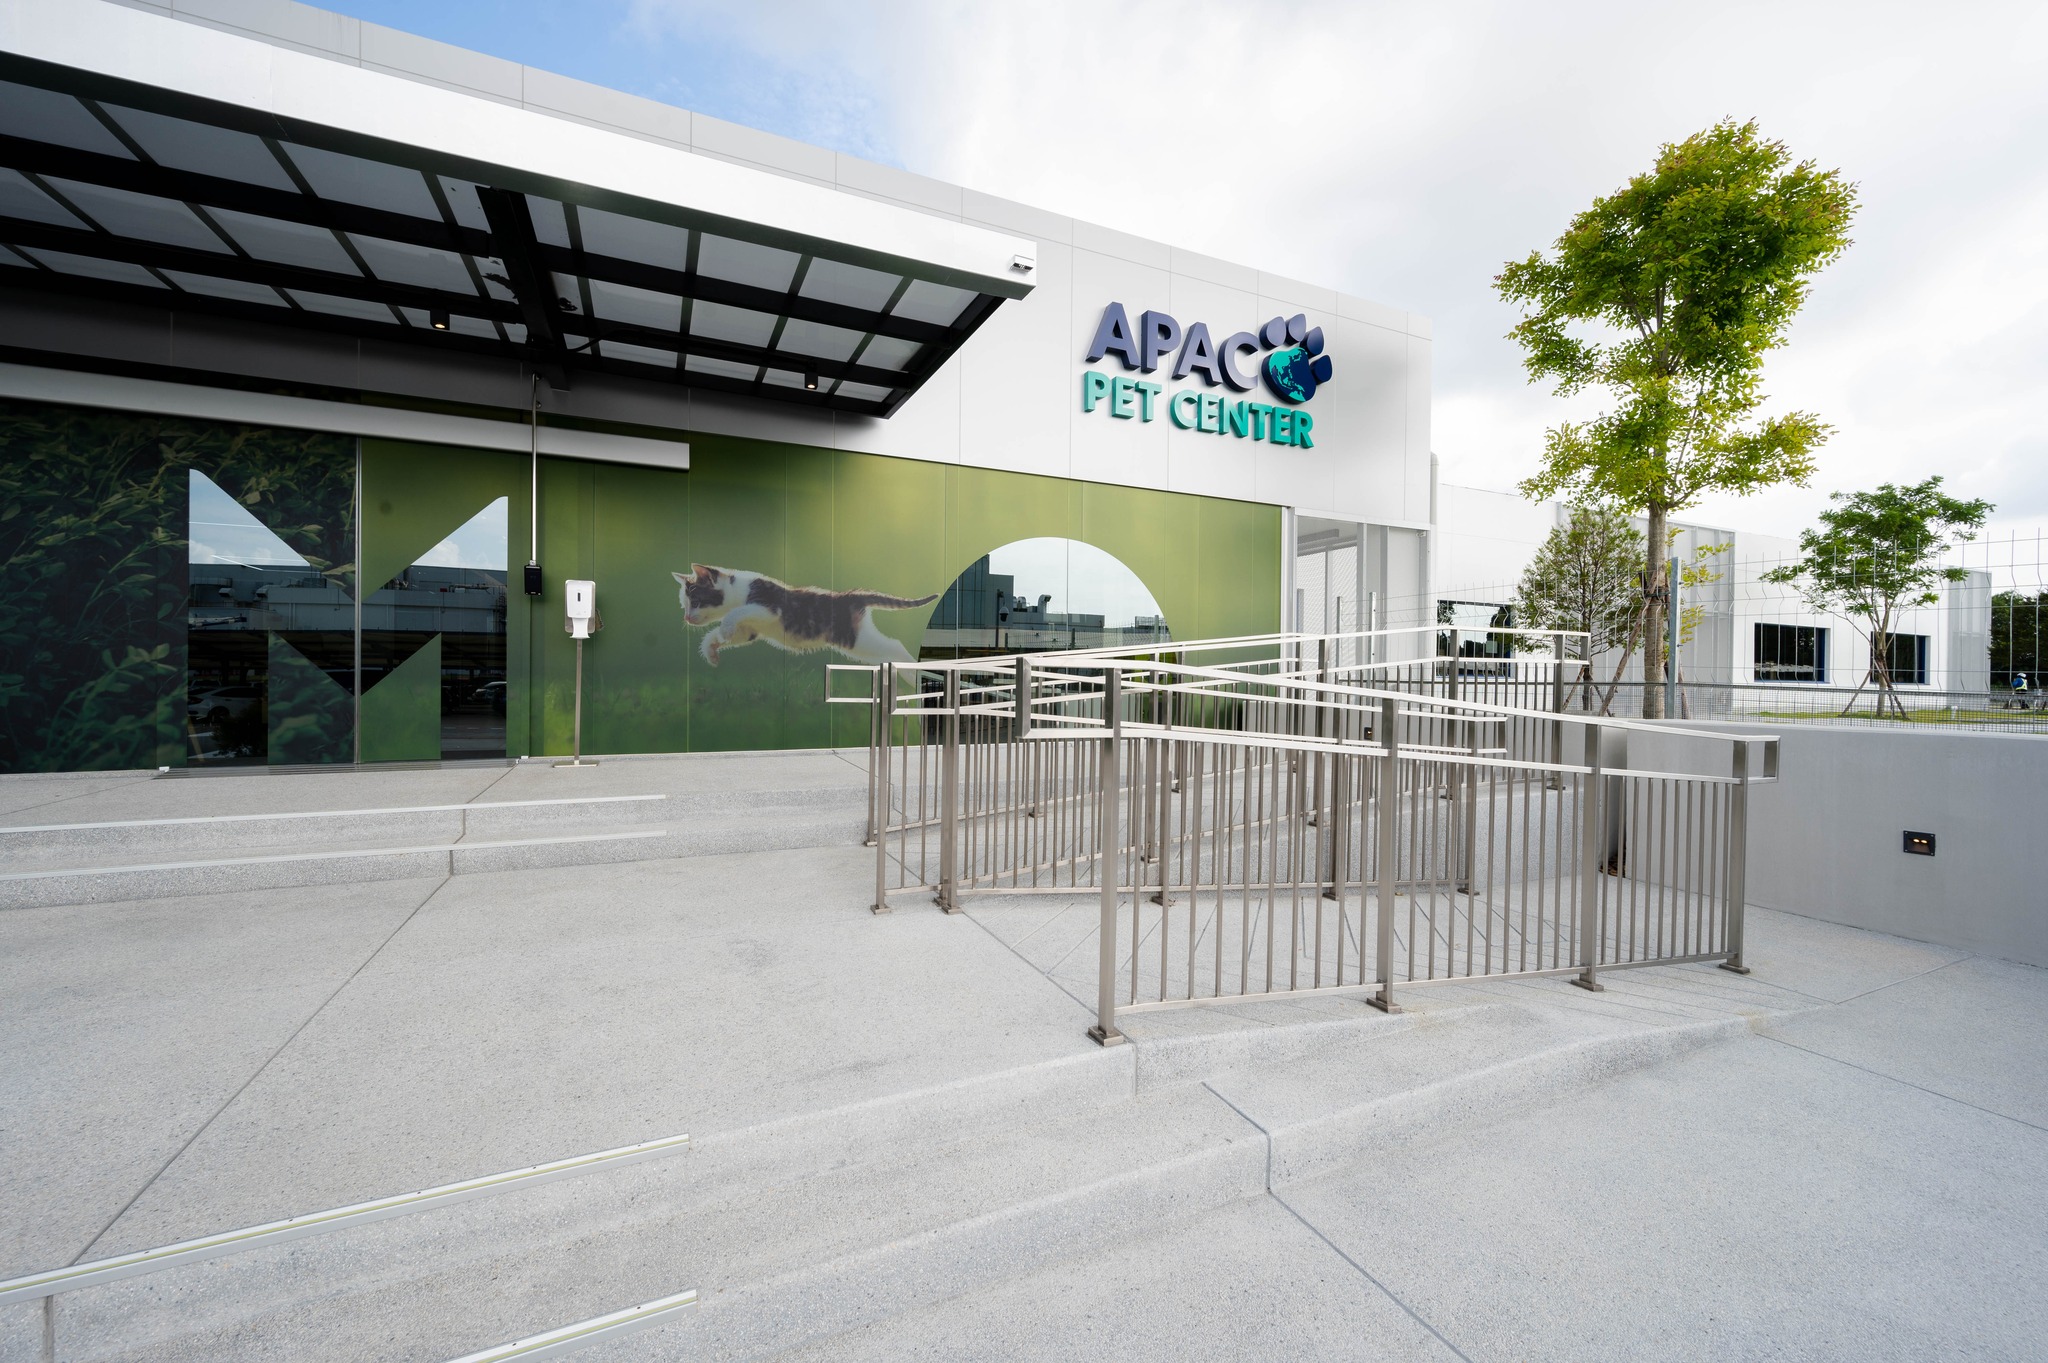 Mars Petcare opens its first R&D center in Asia Pacific